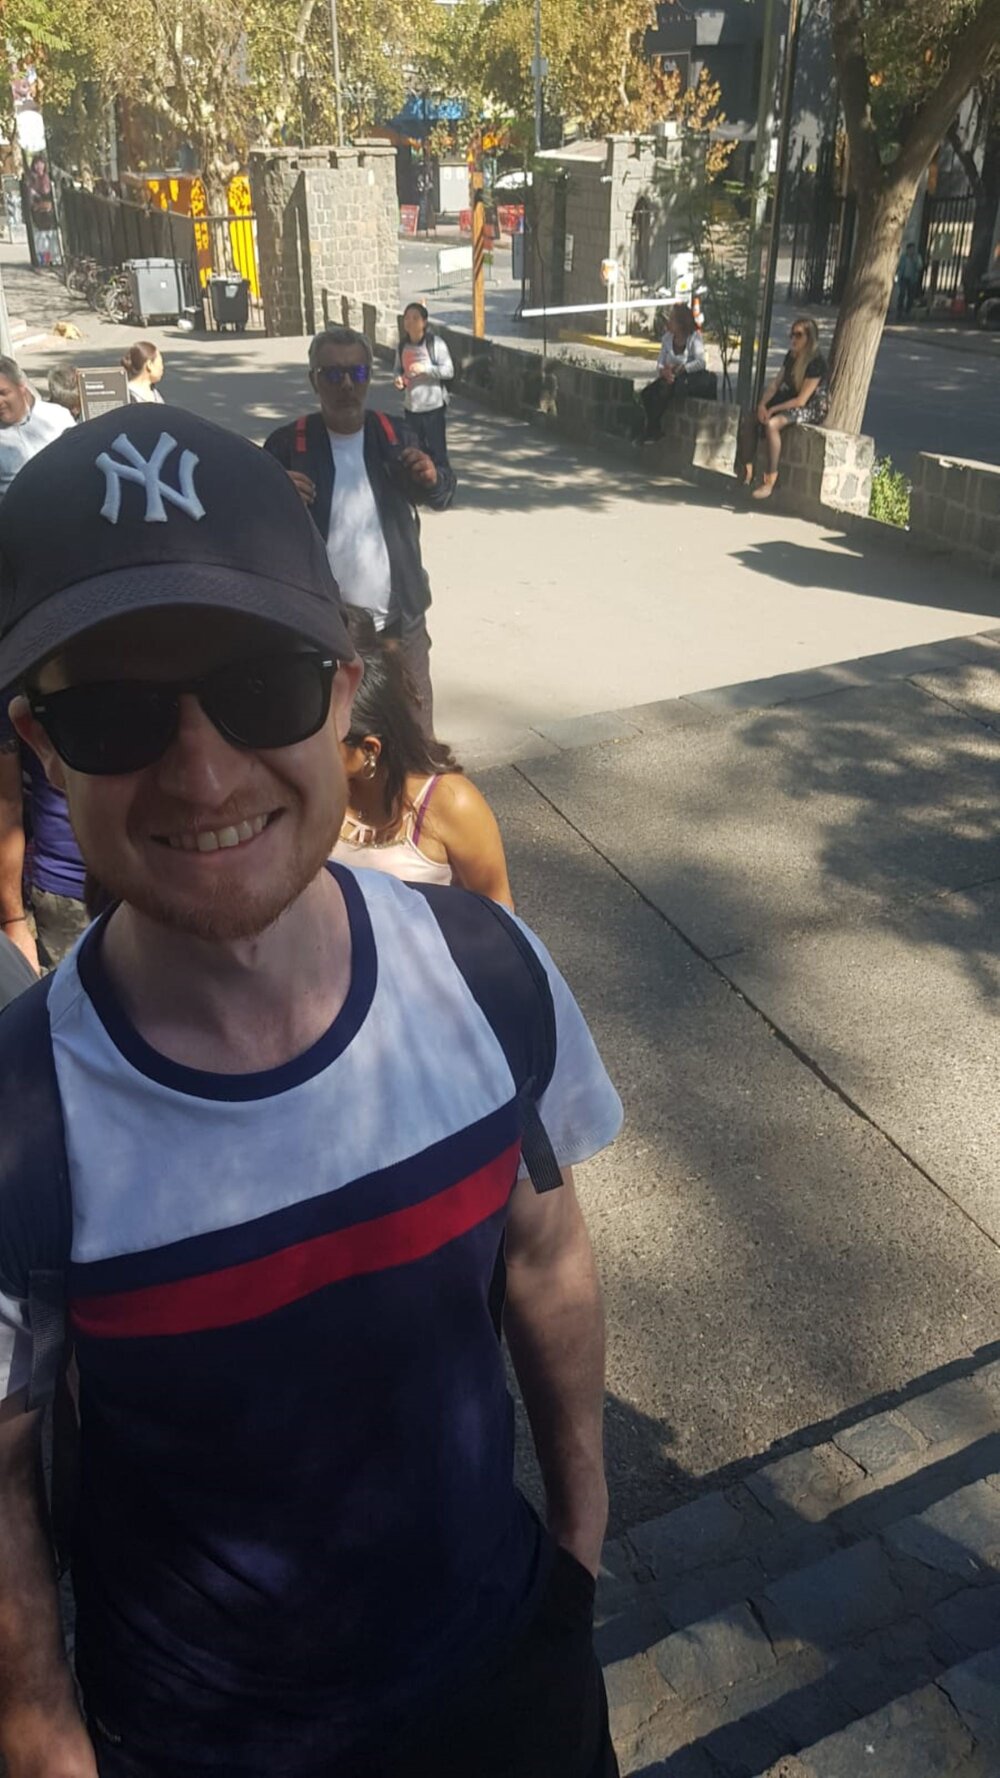 Enjoying a queue to see the sites in Santiago 2019. It's sunny and he's wearing a cap and sunglasses. Photo: Alex Waite